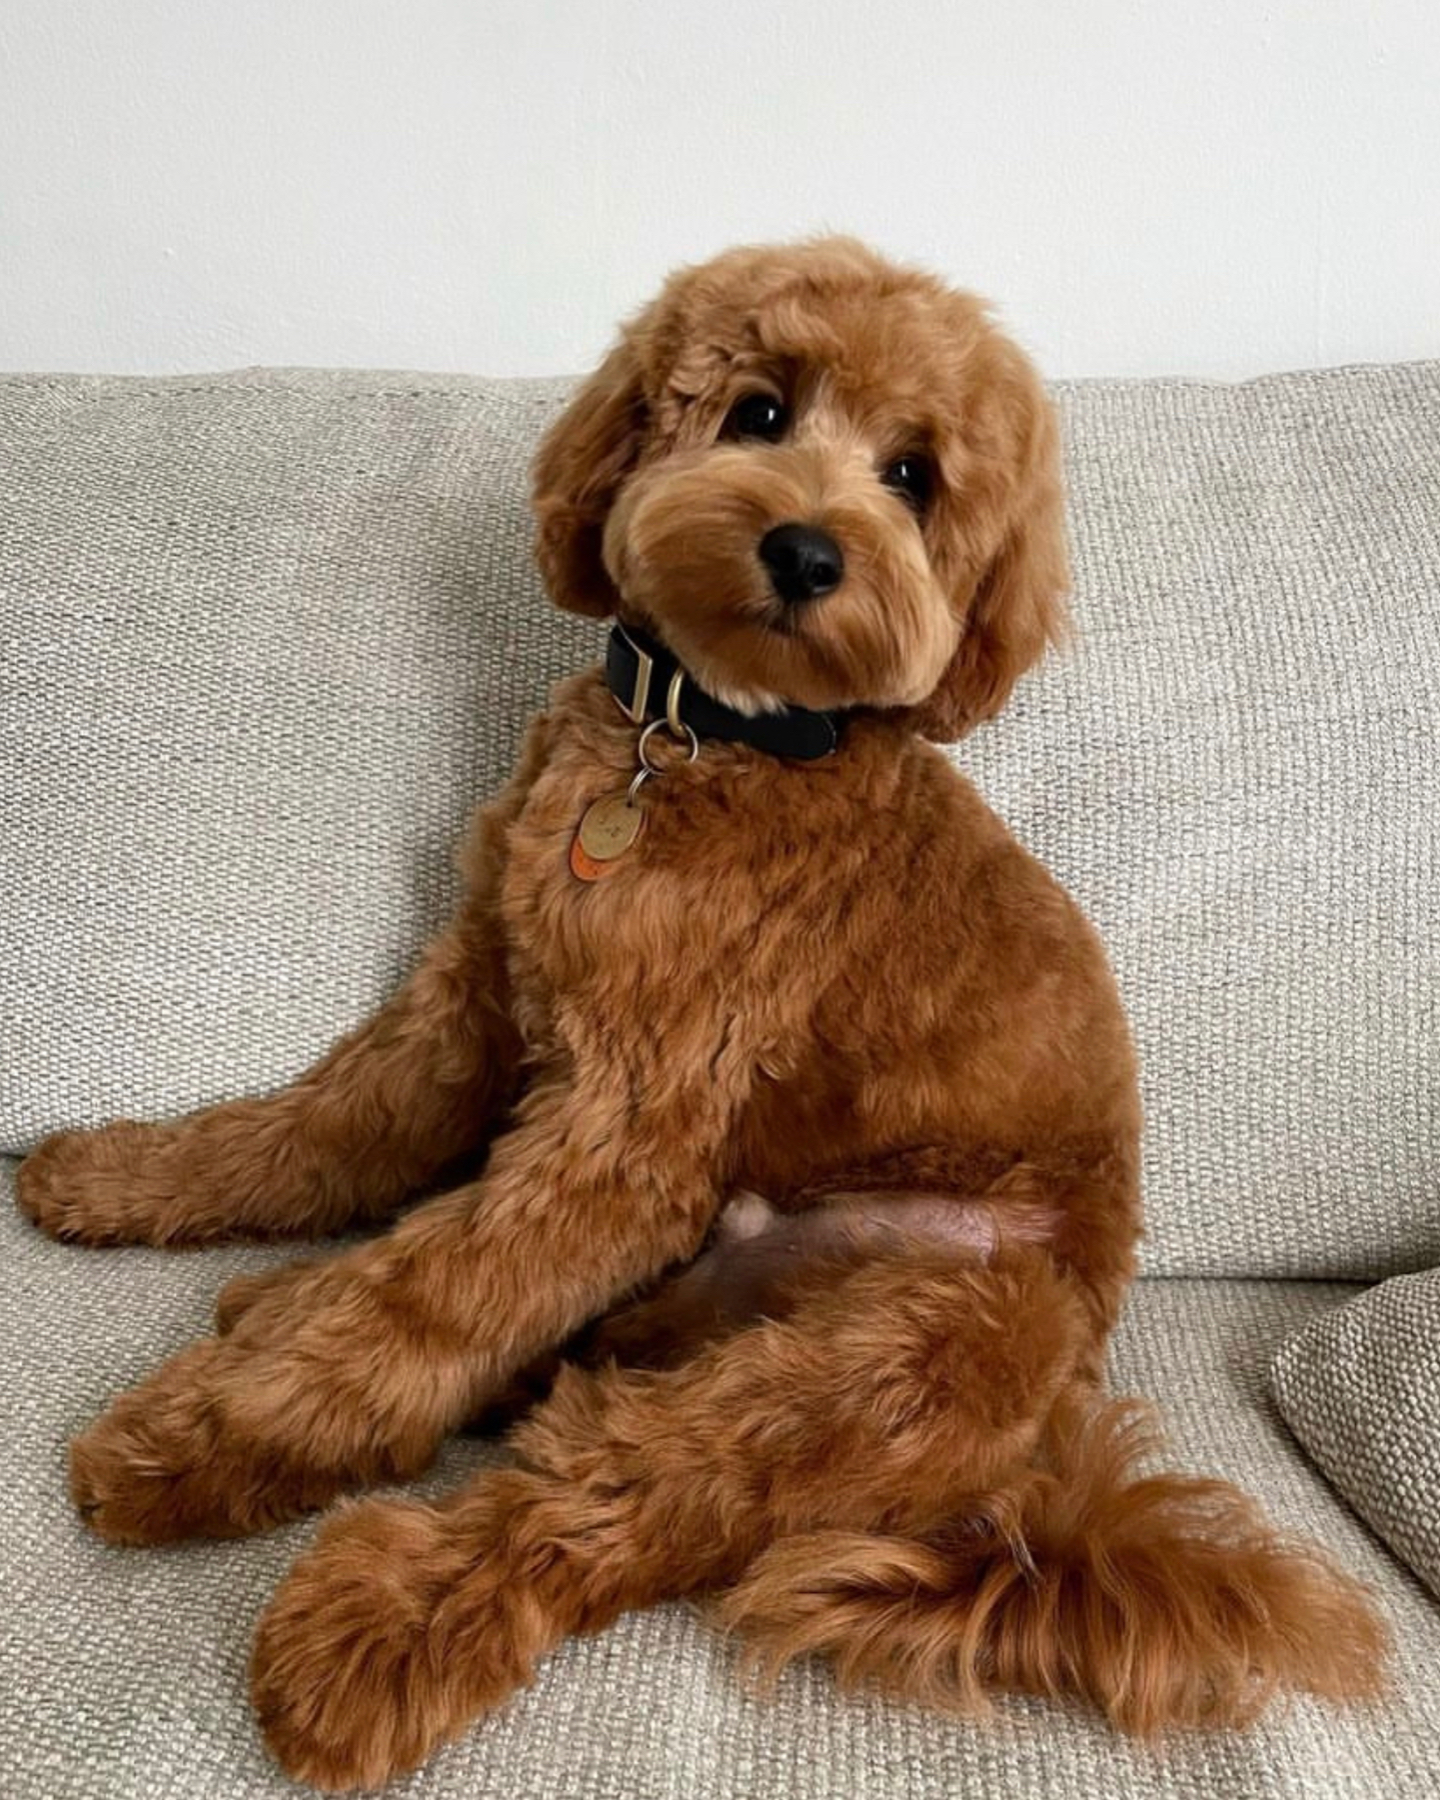 A teddy bear dog laying on a couch